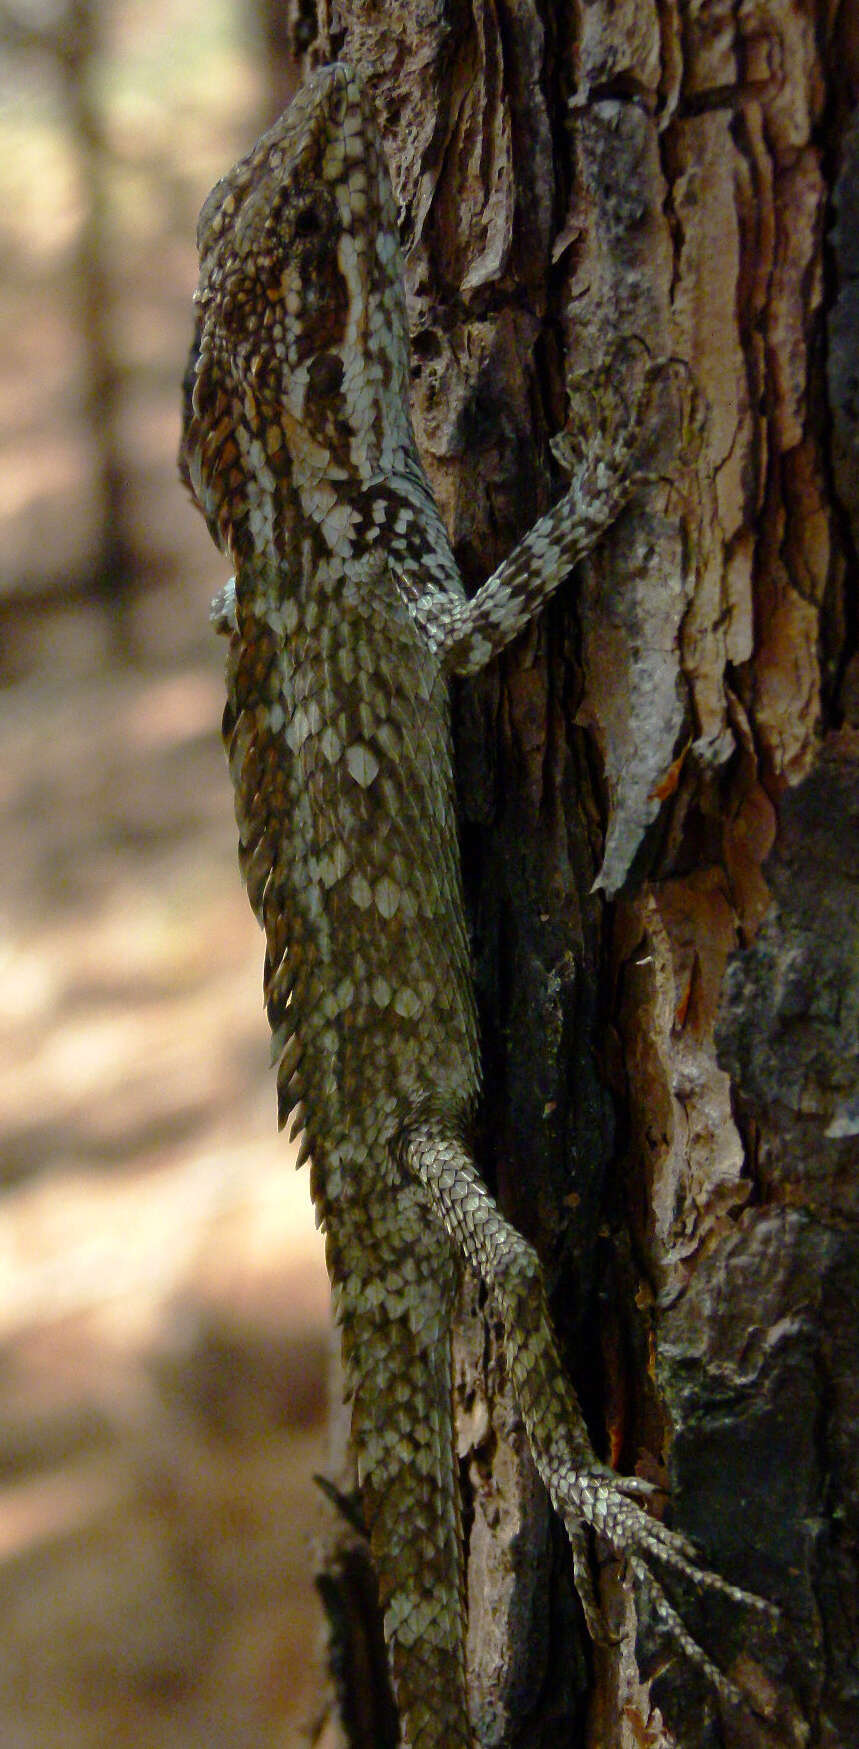 Image of Horsfield's Spiny Lizard